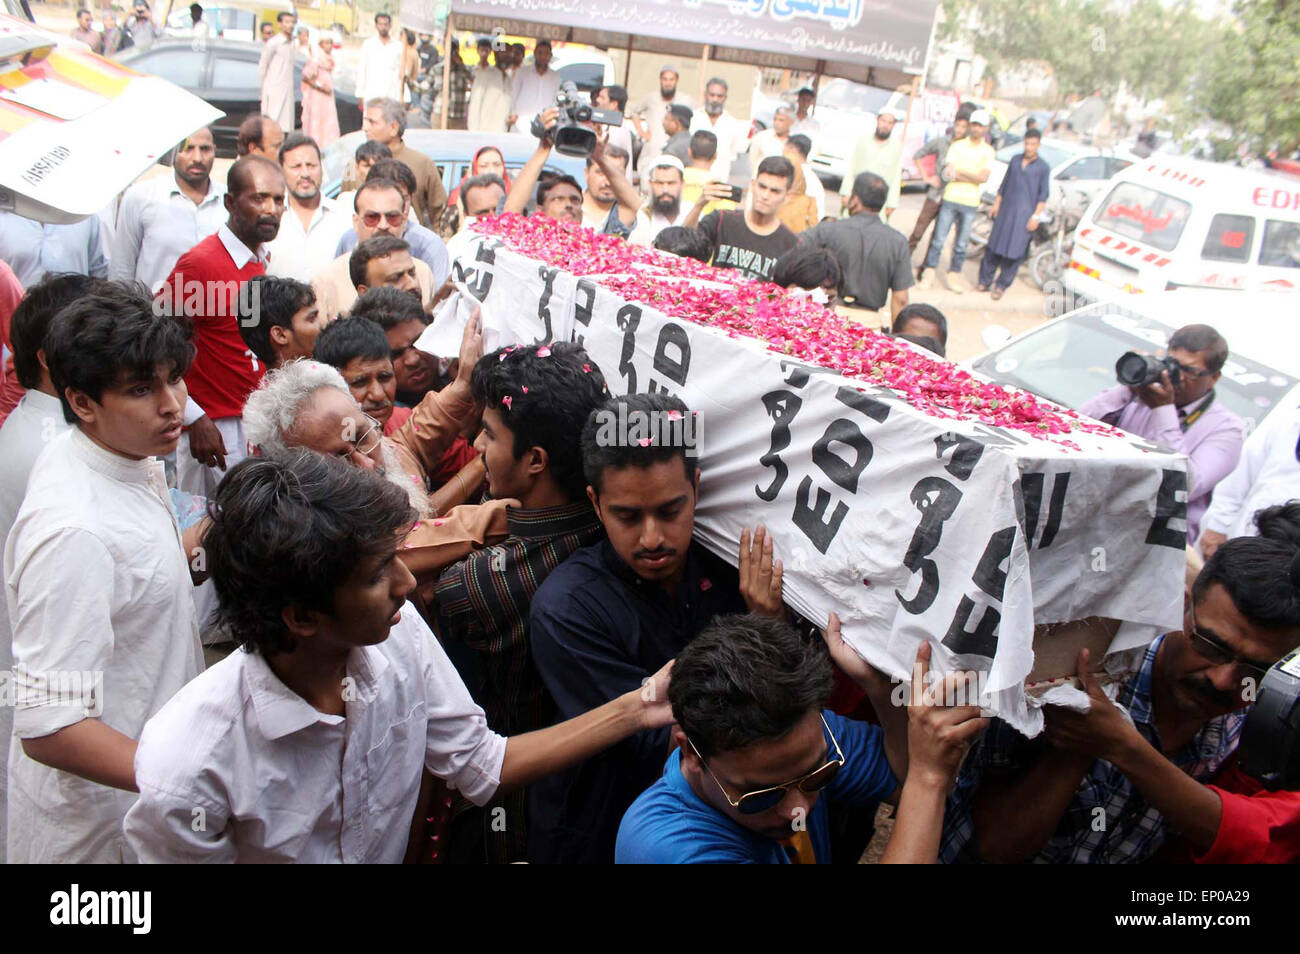 Relatives of Former Muttahida Qaumi Movement (MQM) activist Saulat Mirza carry his dead body to shift an Edhi cold storage who was hanged at Mach prison on Tuesday in triple murder case was stated to be calm and composed at gallows, in Karachi on Tuesday, May 12, 2015. Former Muttahida Qaumi Movement (MQM) activist Saulat Mirza was executed today morning at 4:30 AM, for the murder of former KESC managing director Shahid Hamid, his driver and guard in 1997. Stock Photo